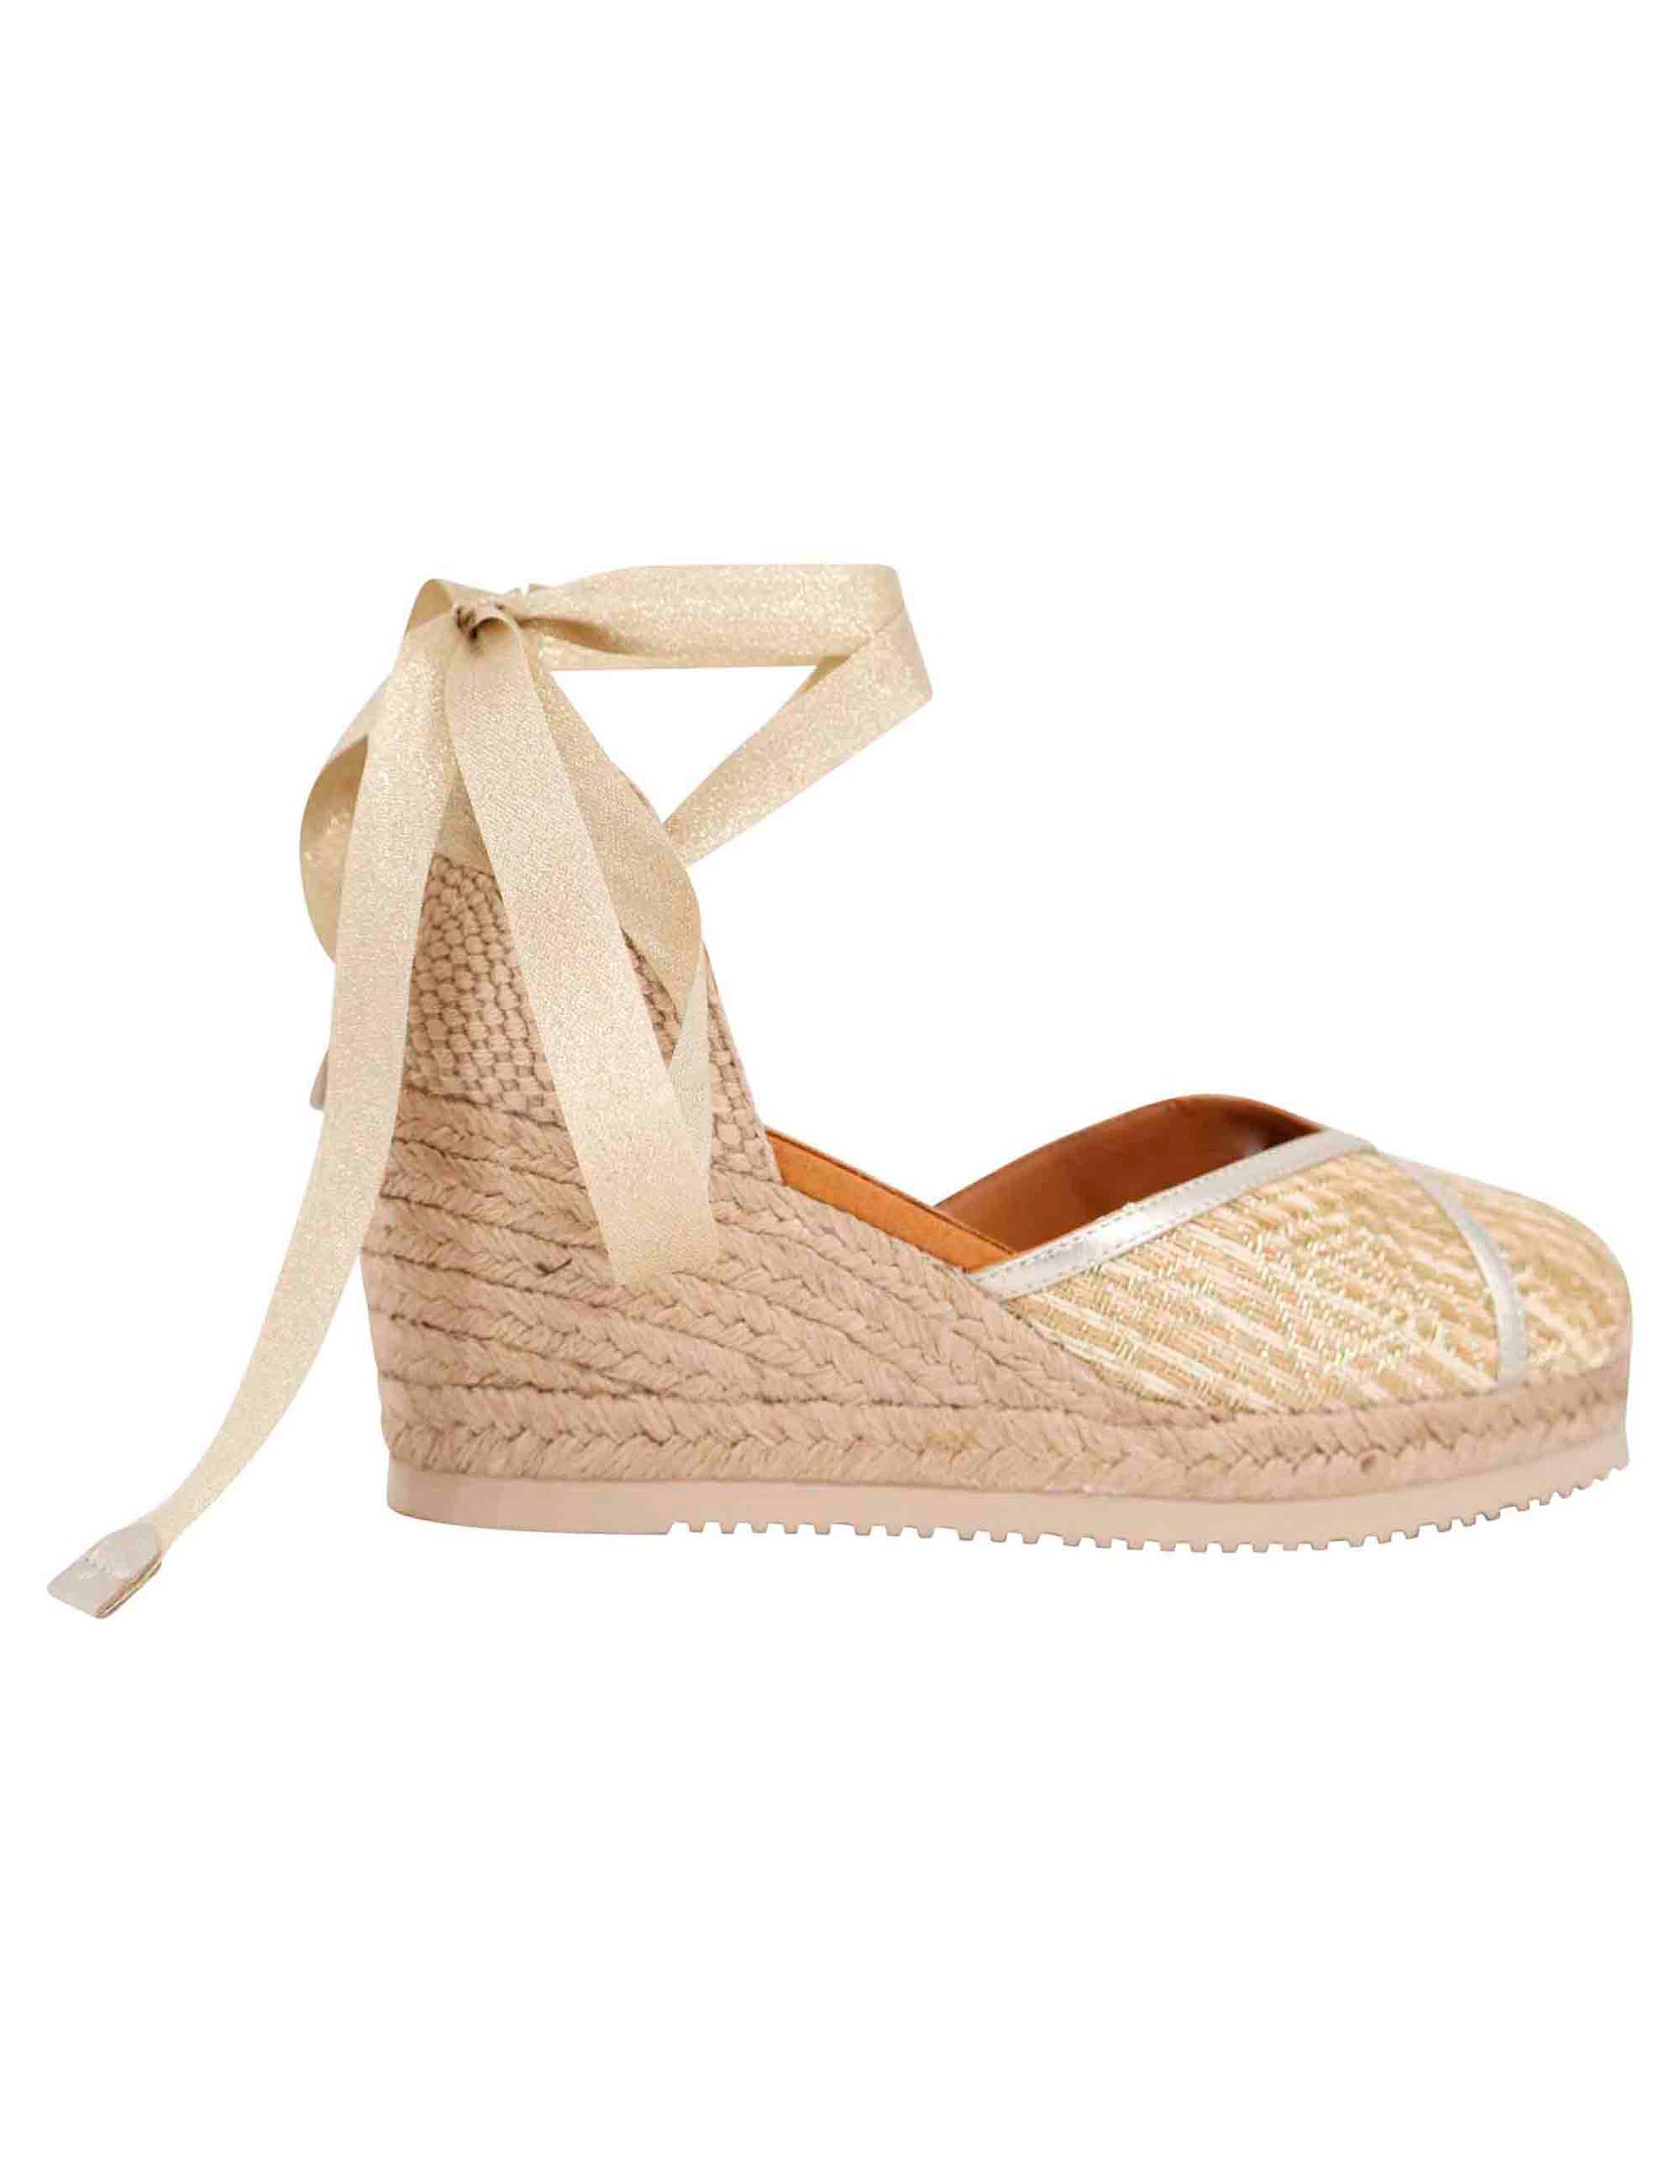 Women's espadrille sandals in gold and platinum fabric with rope wedge